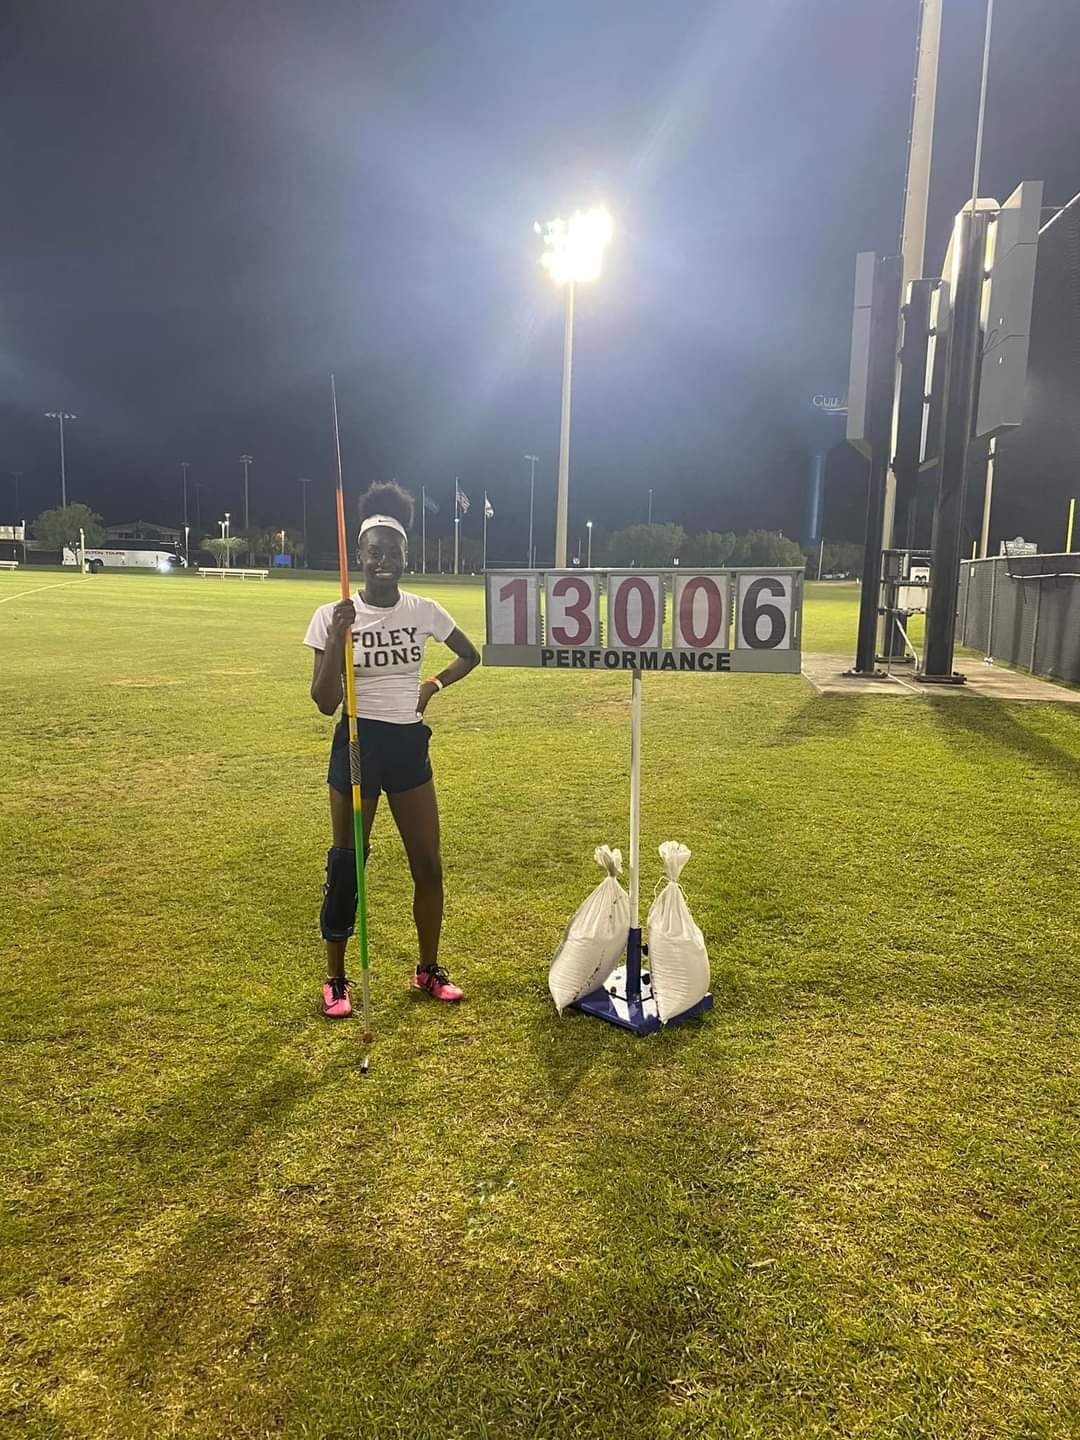 Foley senior Taniya Bragg won the javelin throw with a new personal-record distance at the Class 7A Track and Field State Championships in Gulf Shores last weekend.